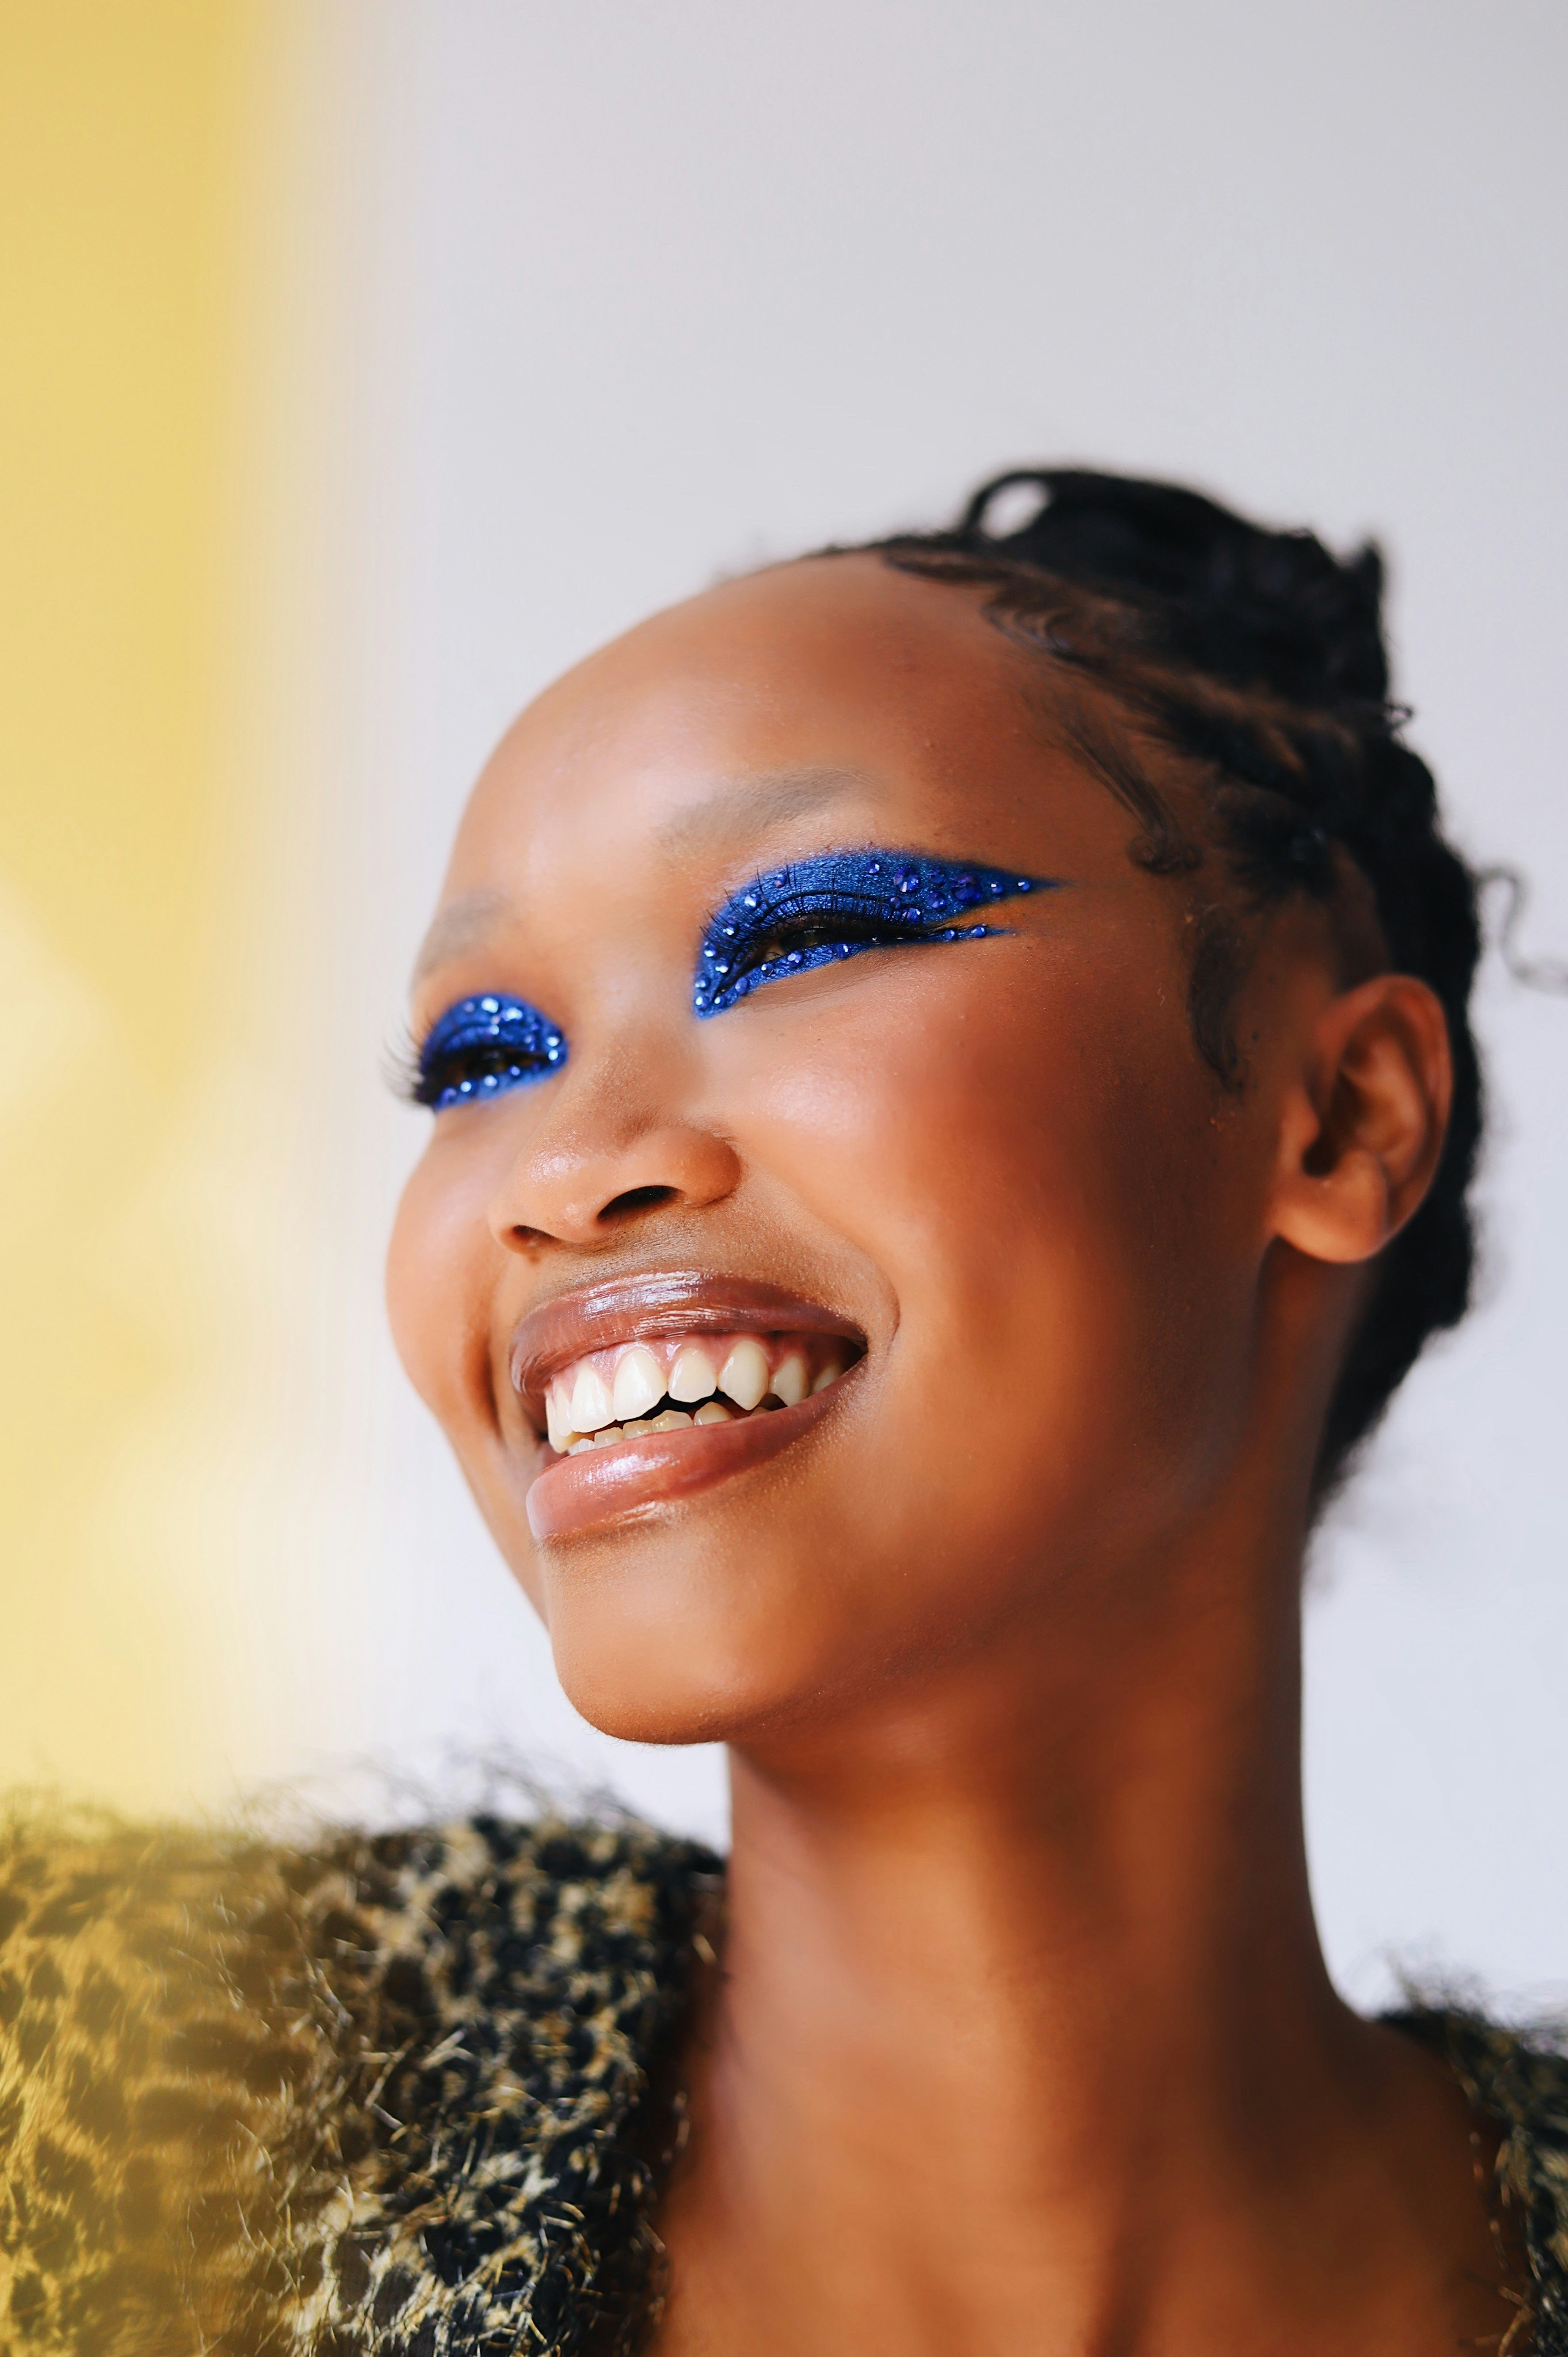 What Are The Current Makeup Trends For Different Seasons And Occasions?